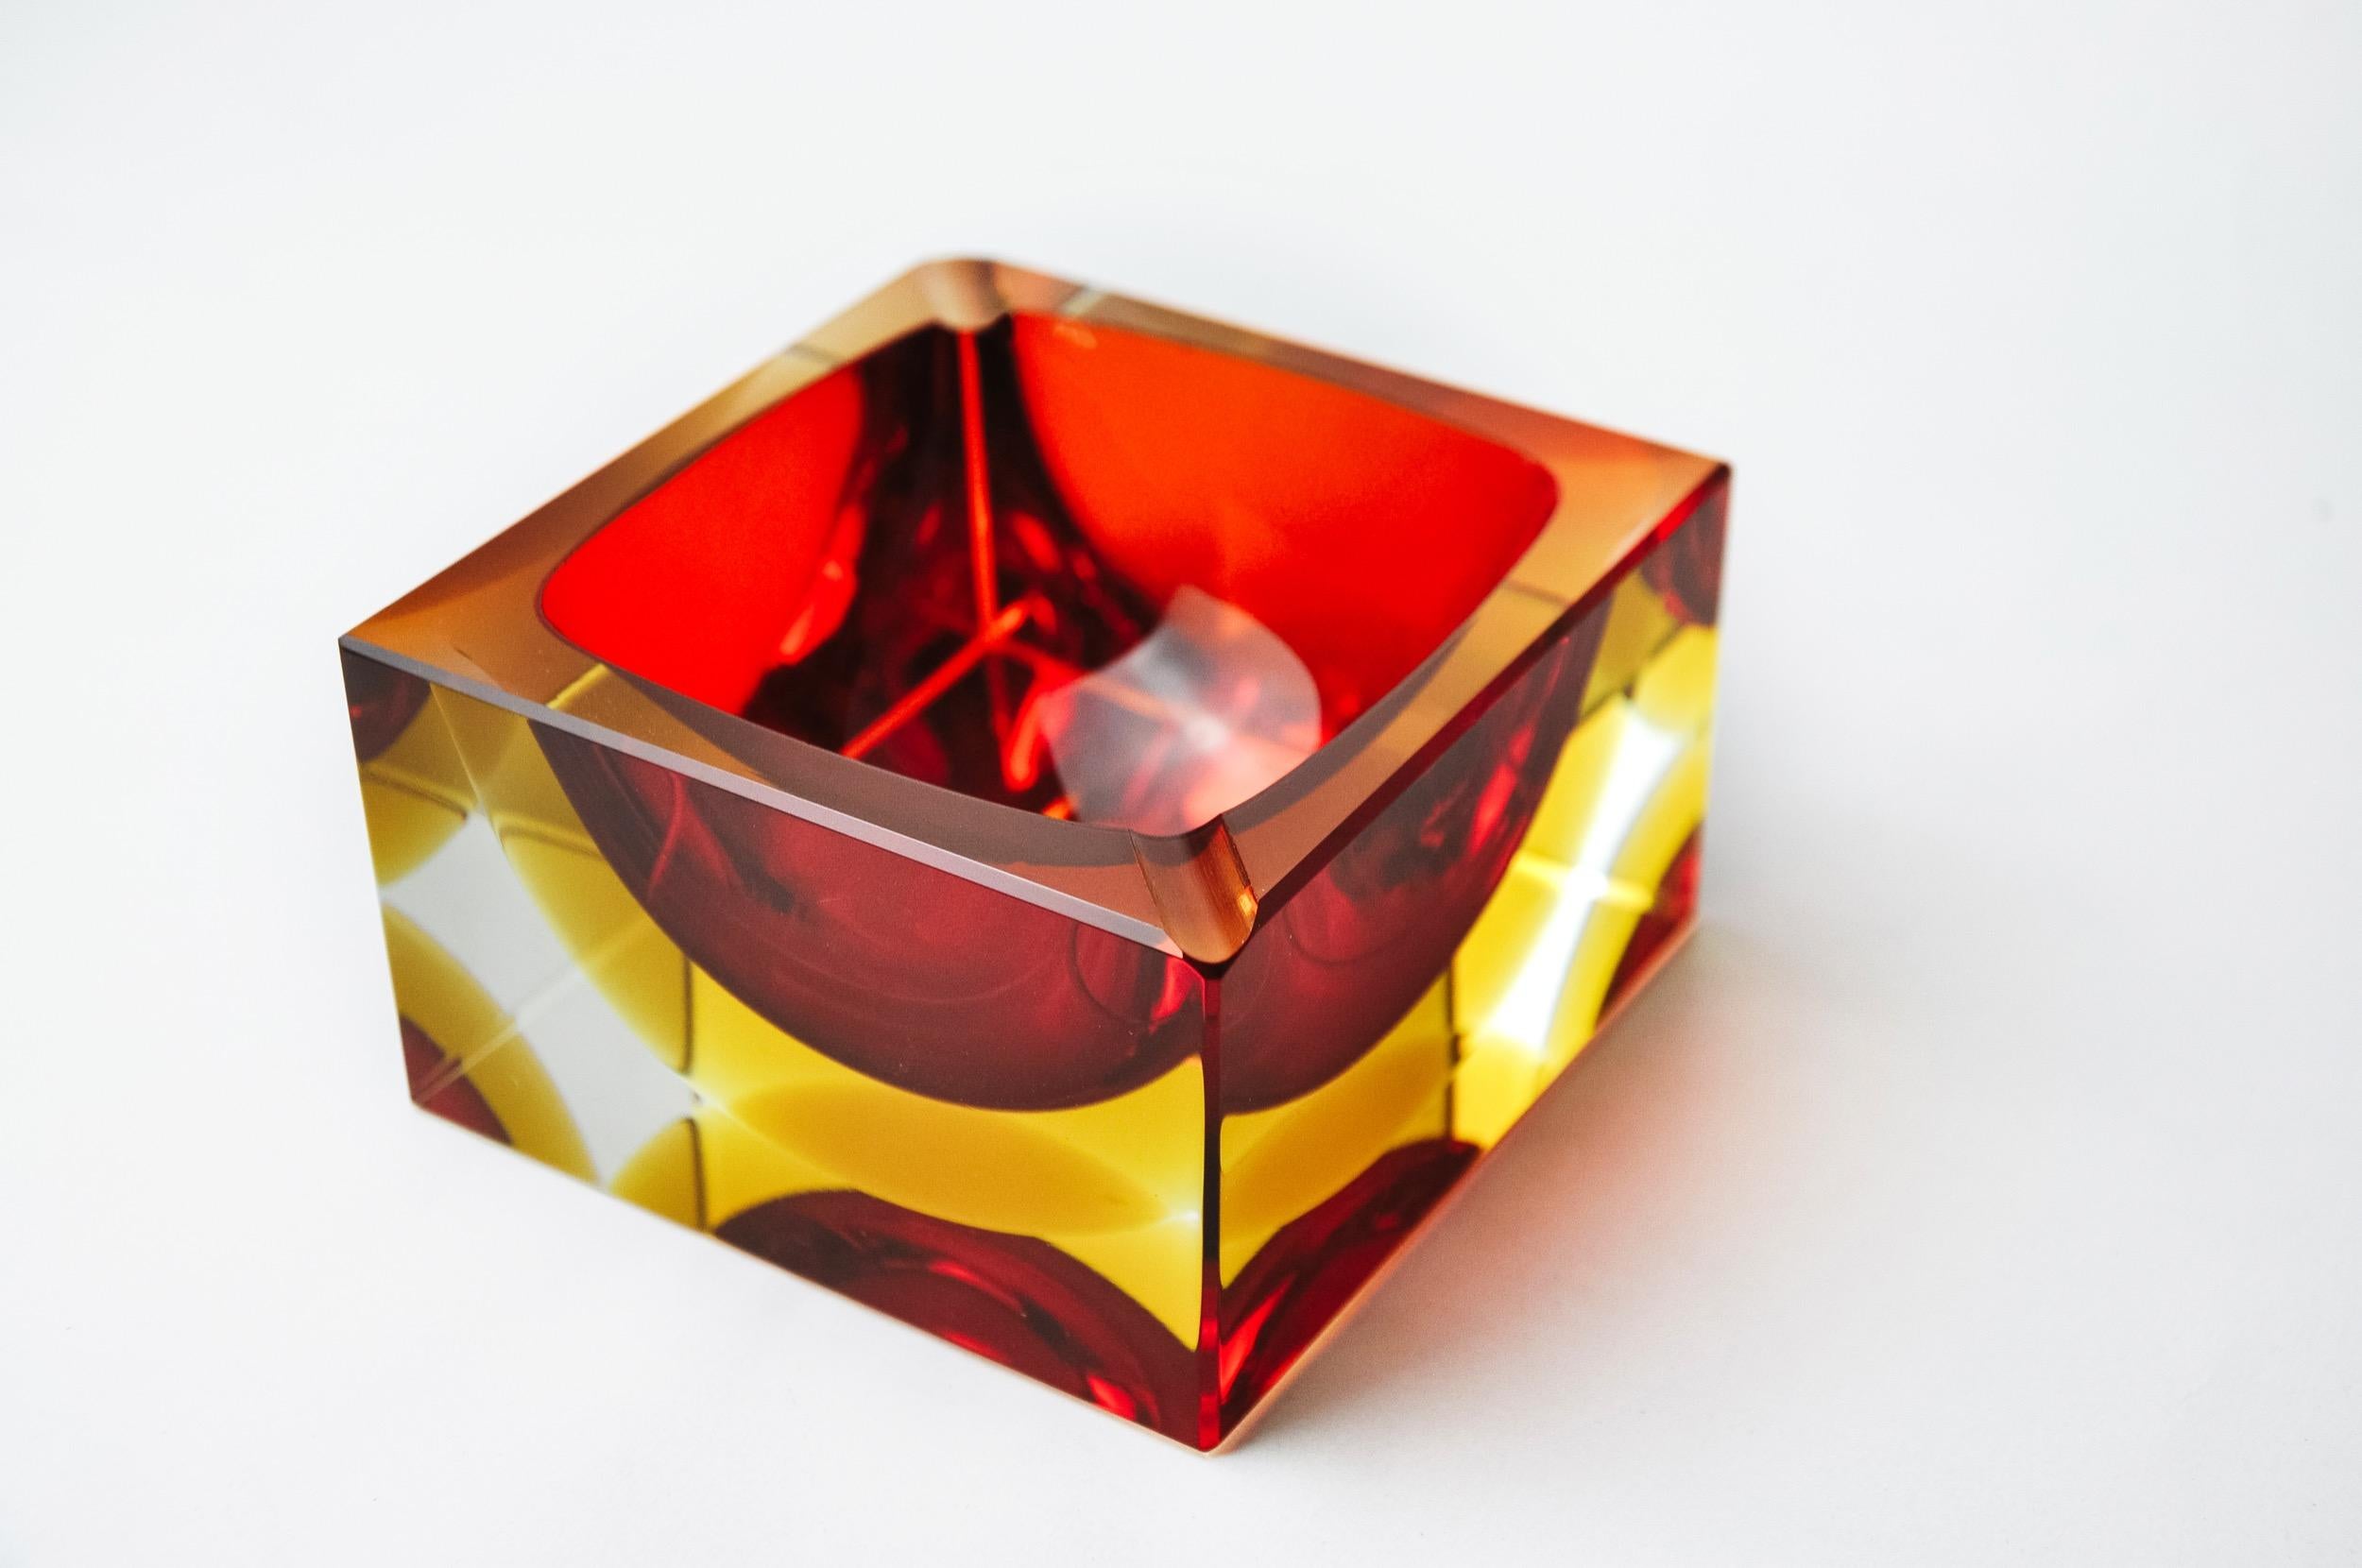 Superb and rare red and yellow cubic Sommerso ashtray designed and manufactured for Seguso in Murano in the 1970s. Handcrafted work of faceted glass using the 